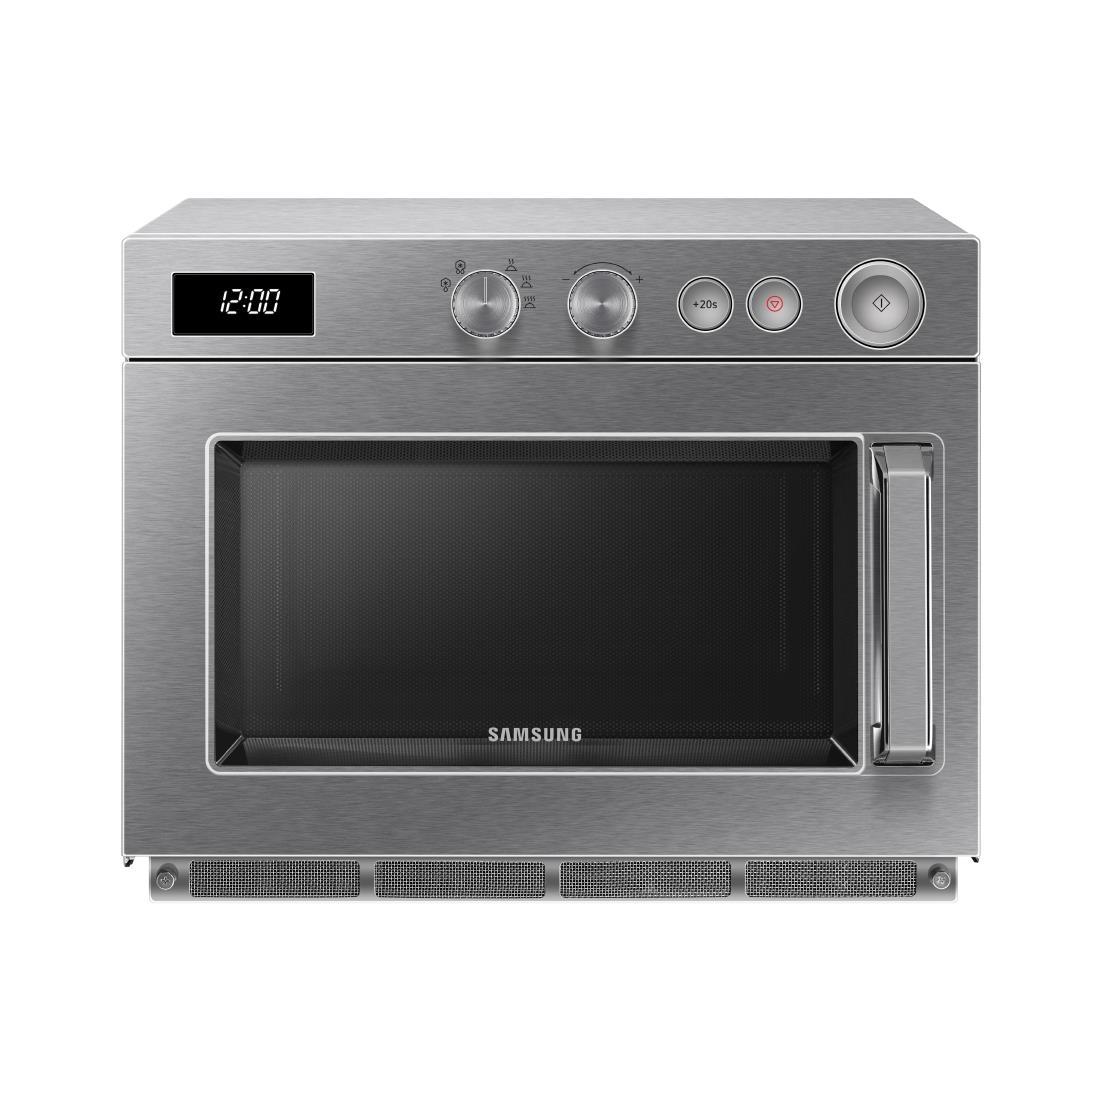 Samsung Commercial Microwave Manual 26Ltr 1850W - FS315  - 1